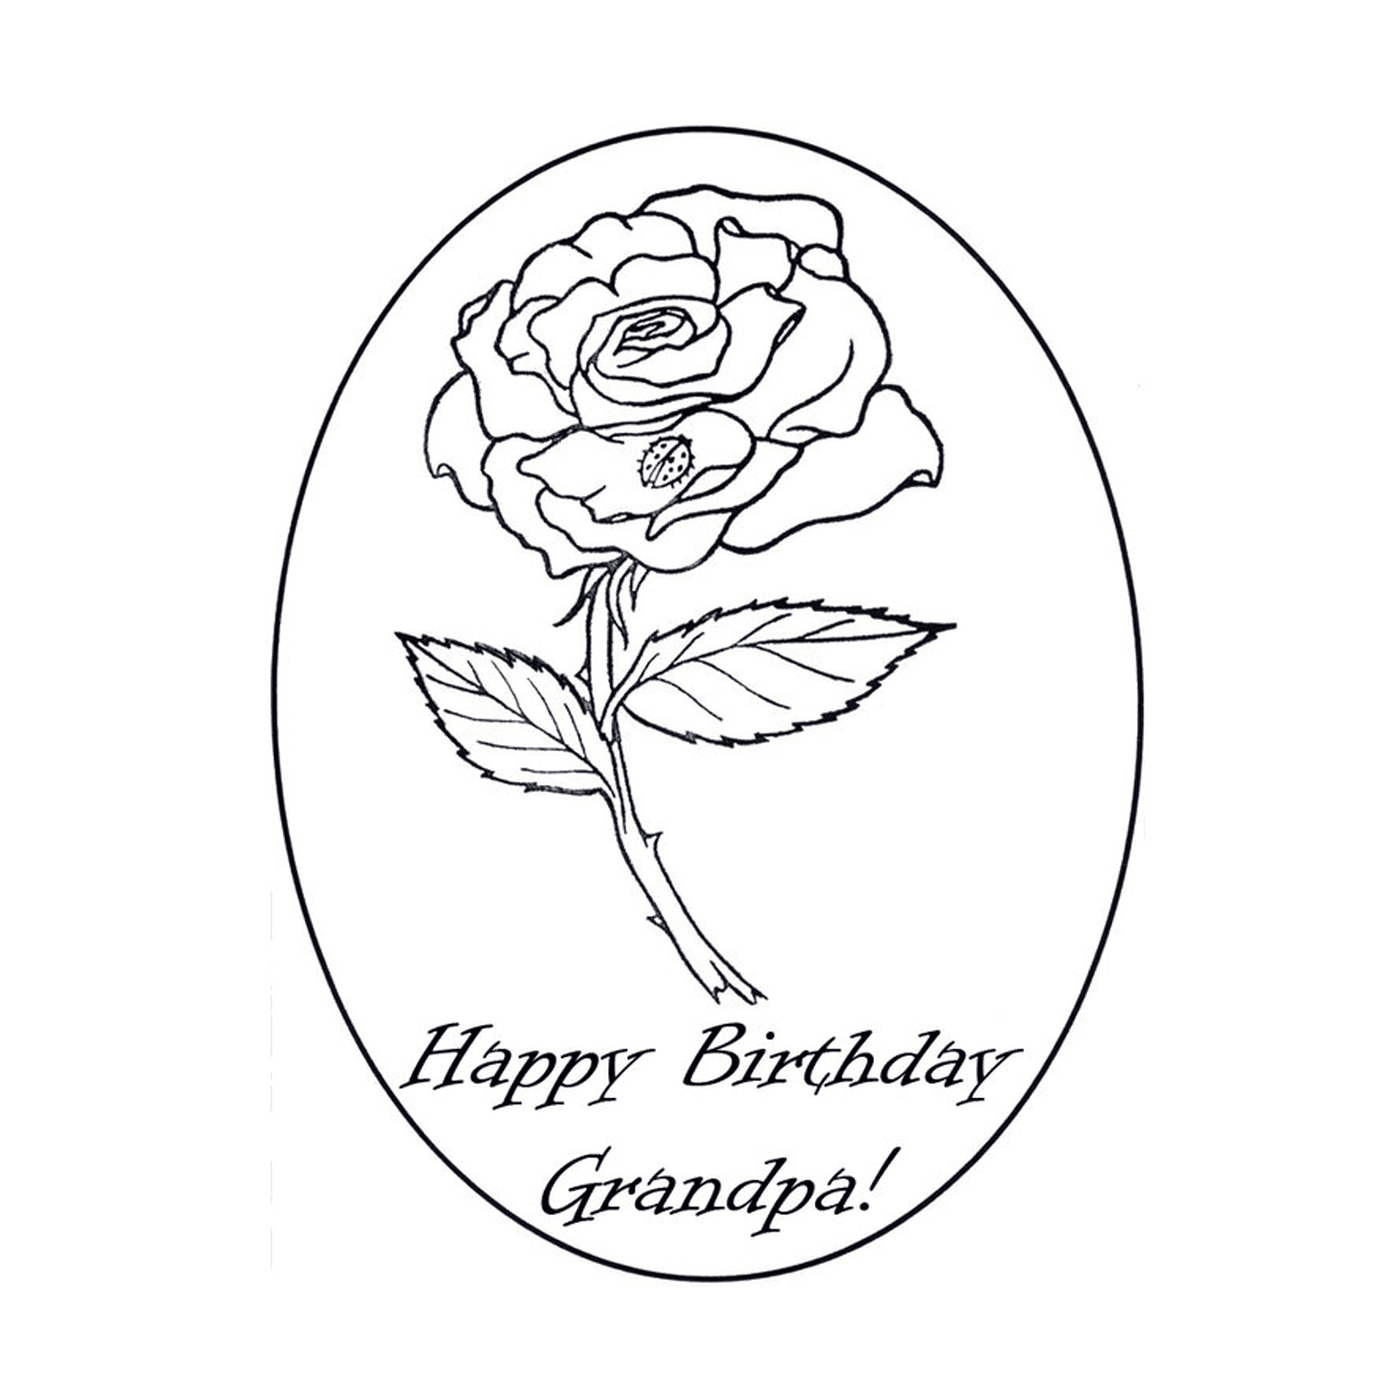  a birthday card with a rose 